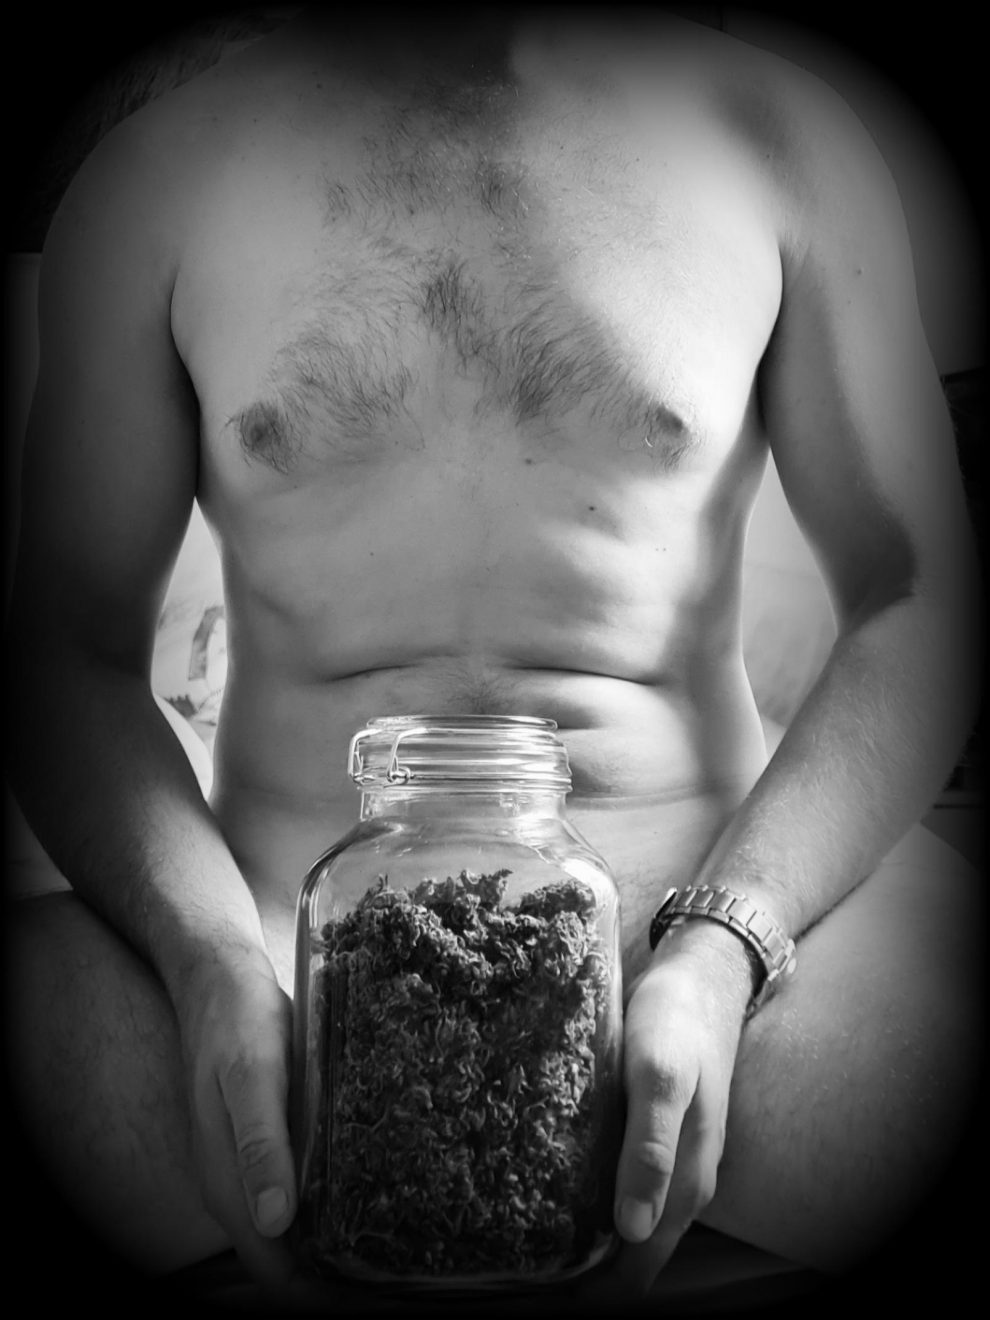 There's a surprise at the bottom if you help (m)e get through this jar 😏